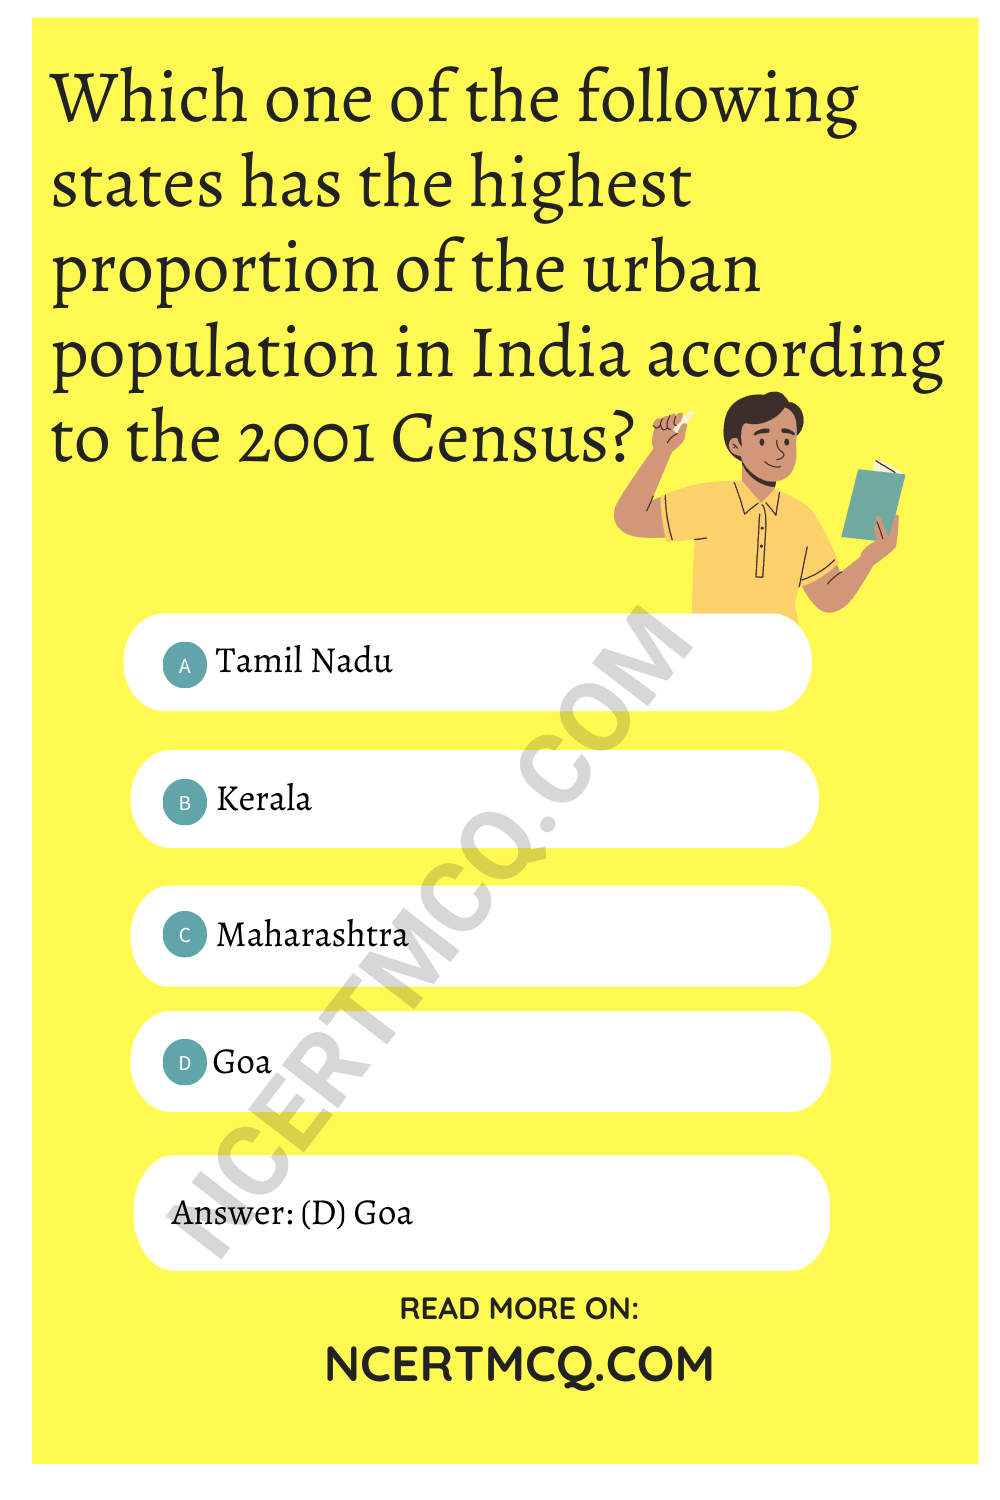 Which one of the following states has the highest proportion of the urban population in India according to the 2001 Census?